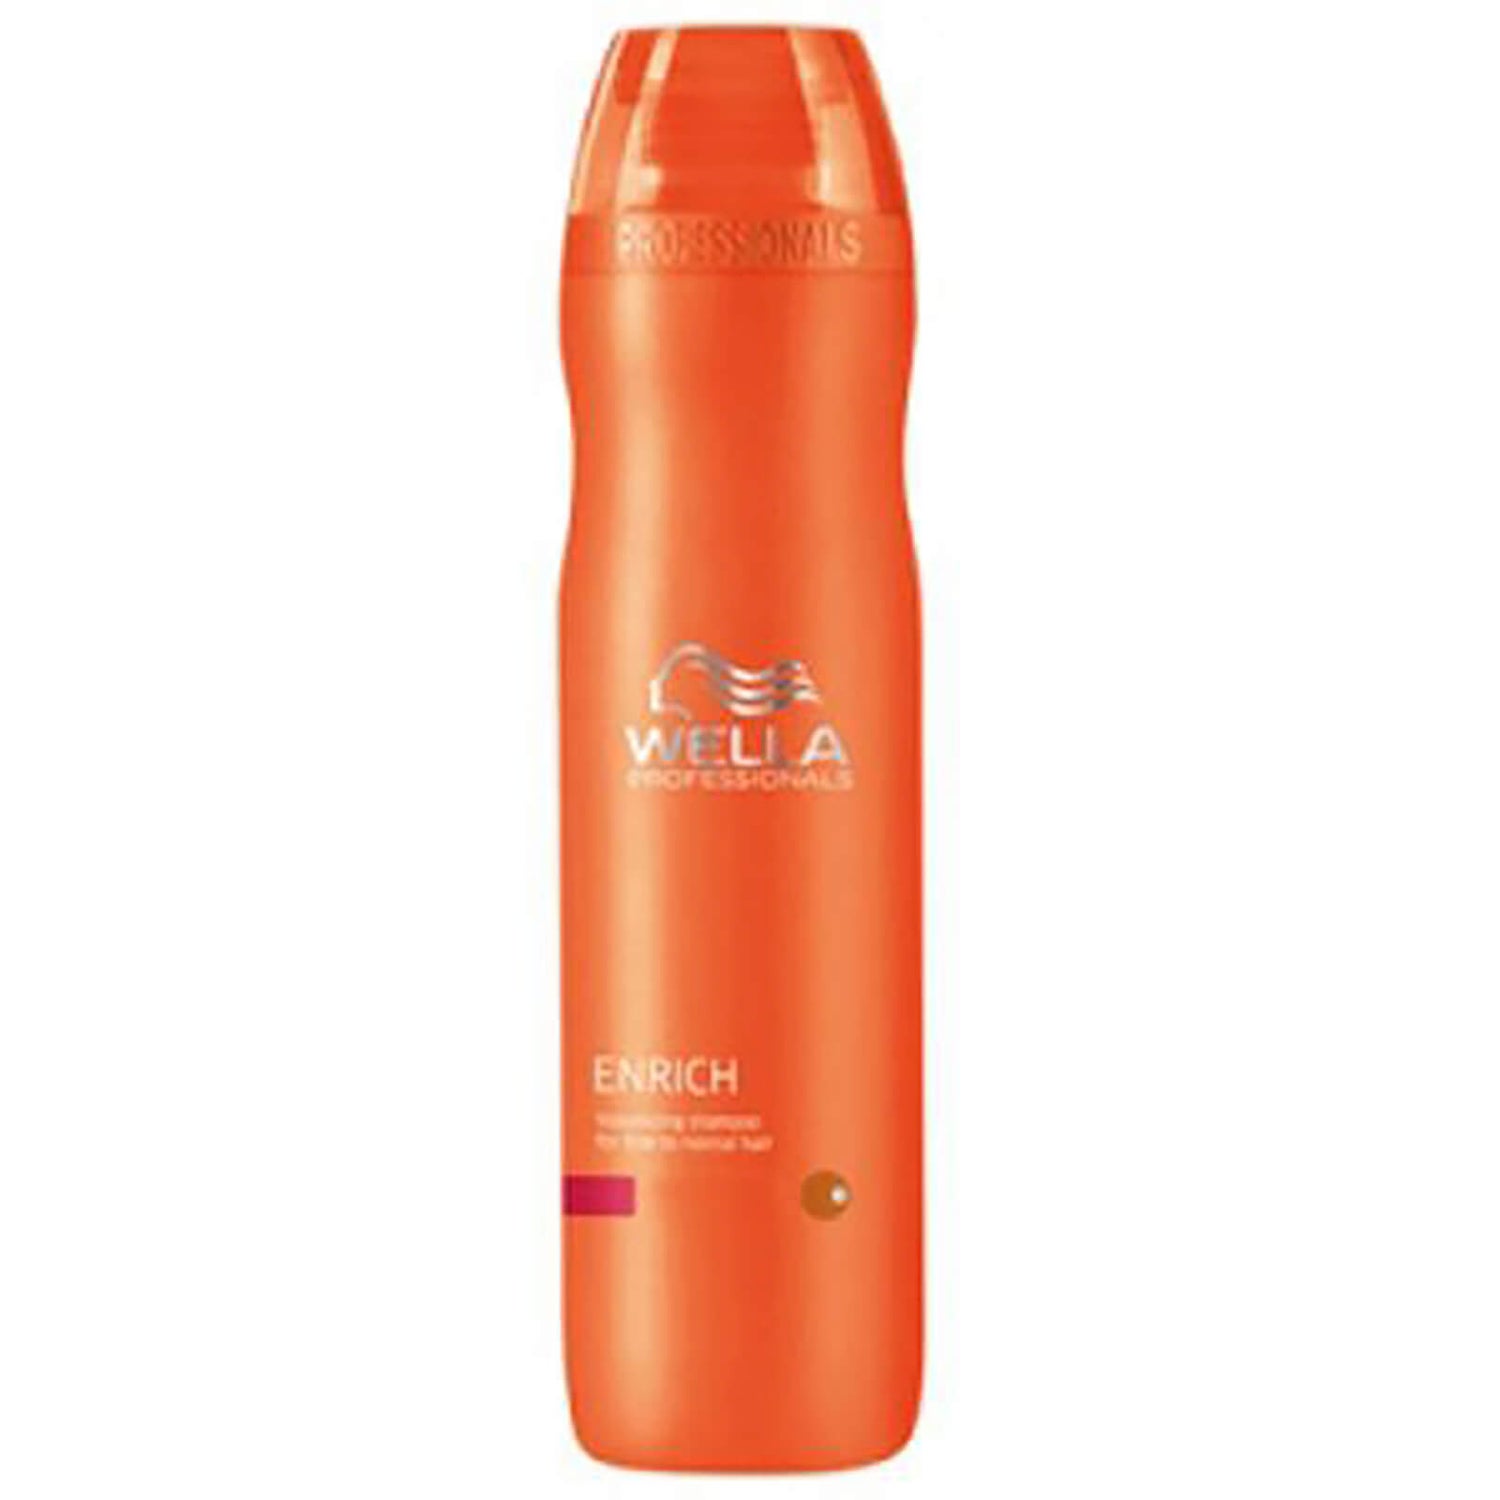 Wella Professionals Enrich Volumizing Shampoo For Fine To Normal Hair (7oz)